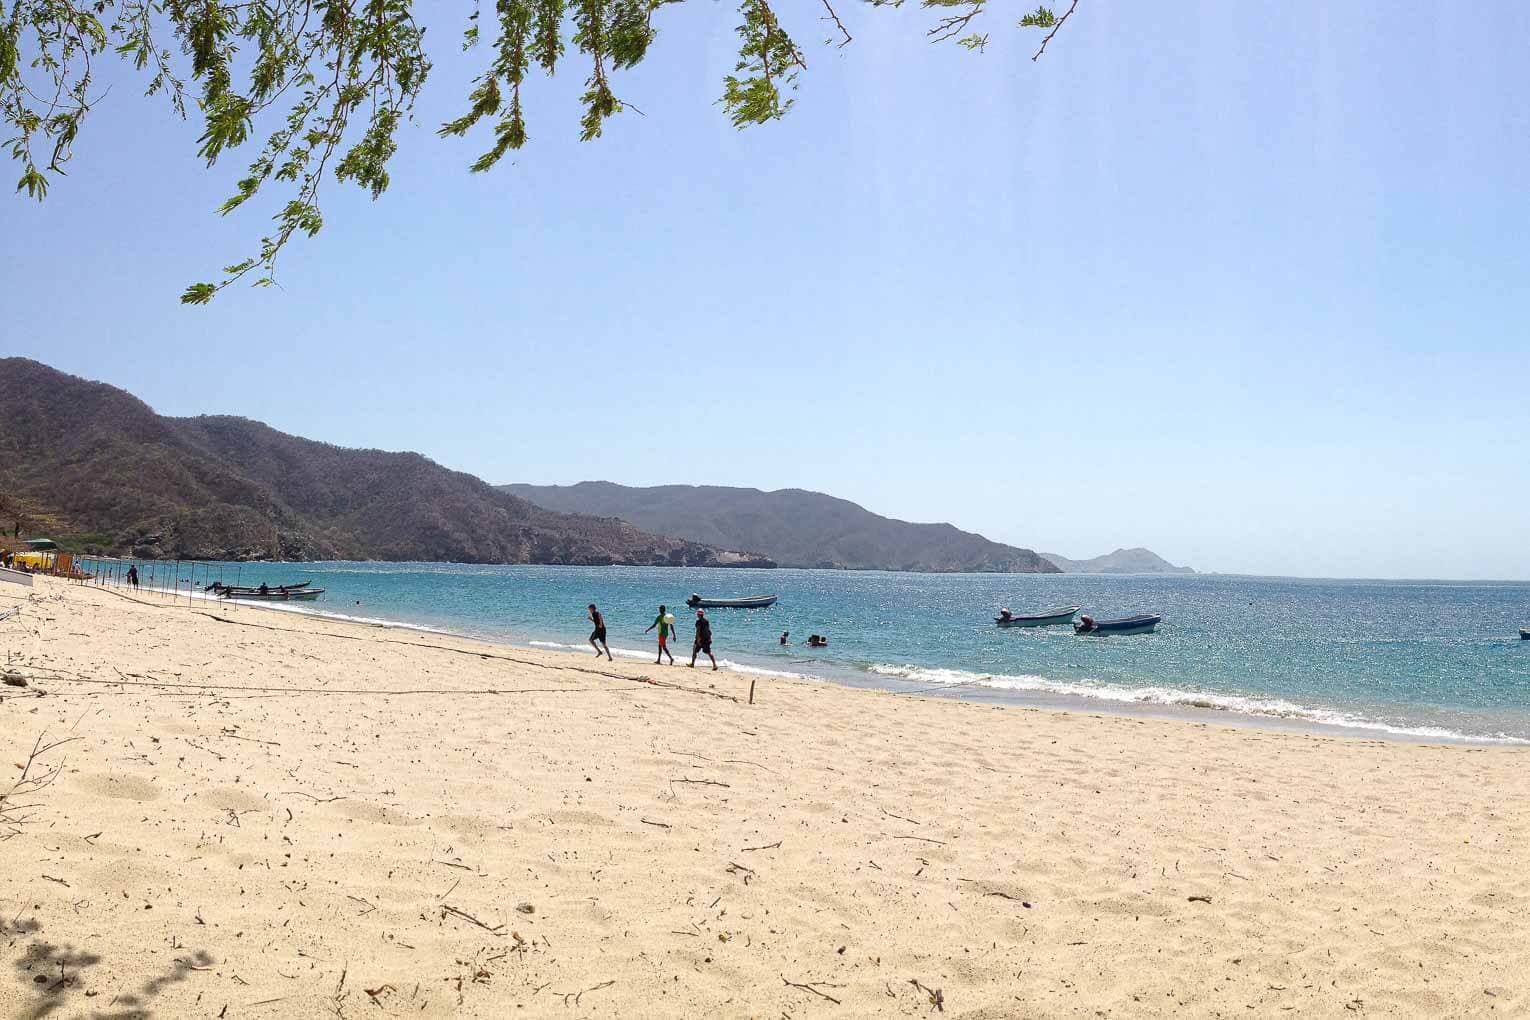 Tayrona National Park travel guide: all you need to know